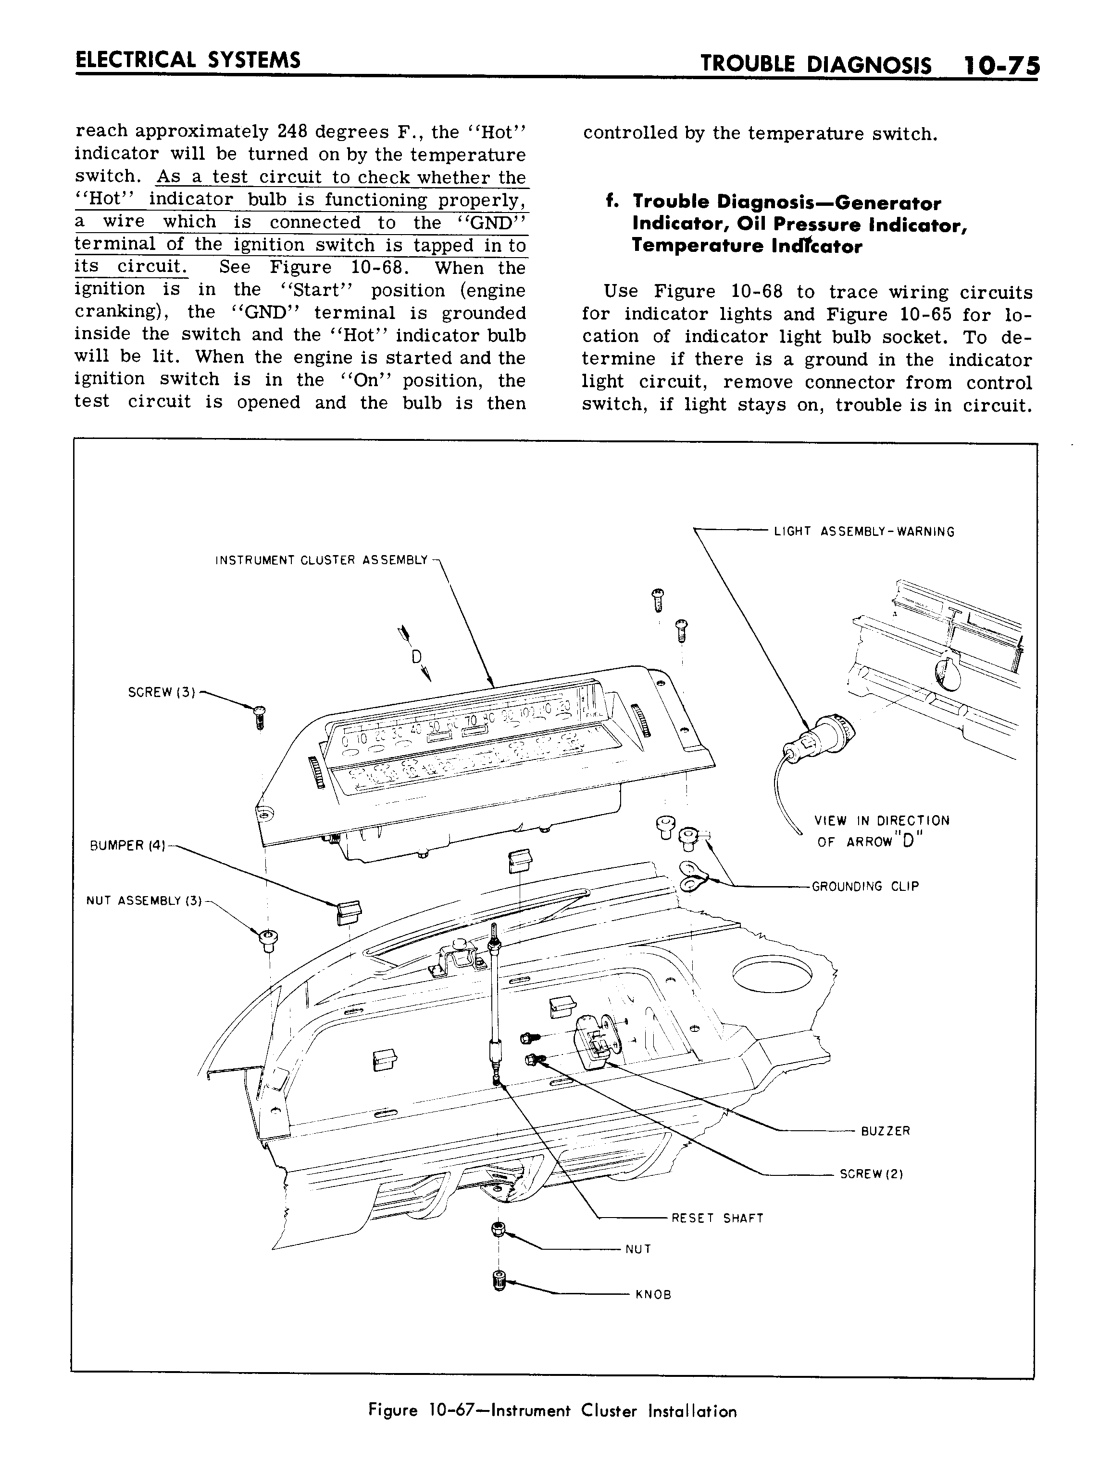 n_10 1961 Buick Shop Manual - Electrical Systems-075-075.jpg